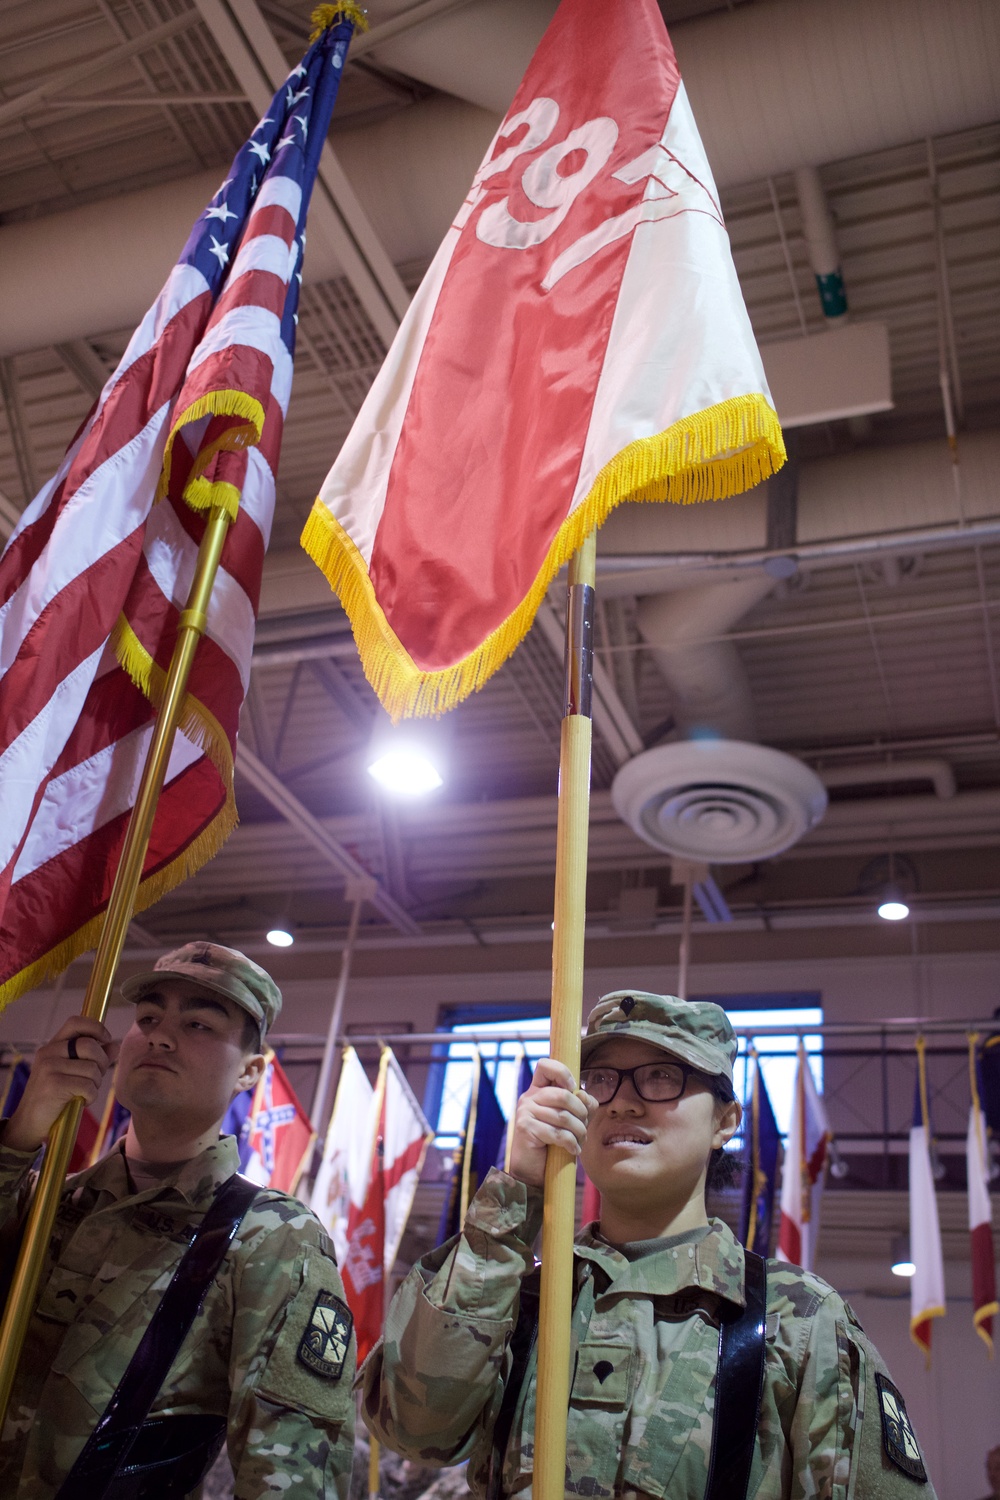 Schell takes command of 297th Regional Support Group